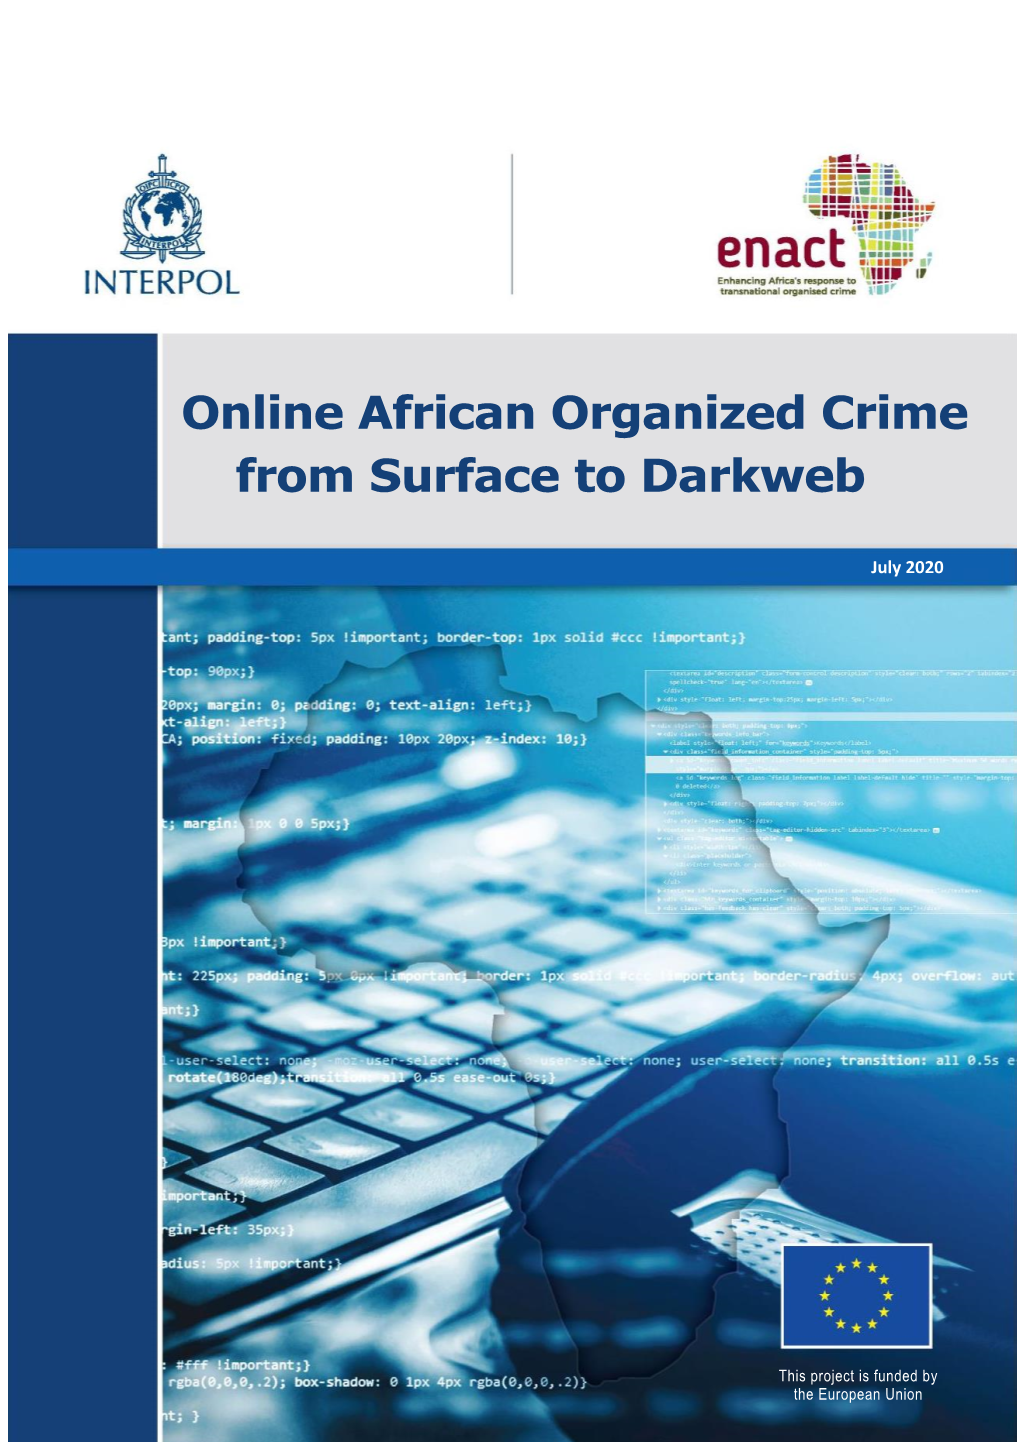 Online African Organized Crime from Surface to Darkweb